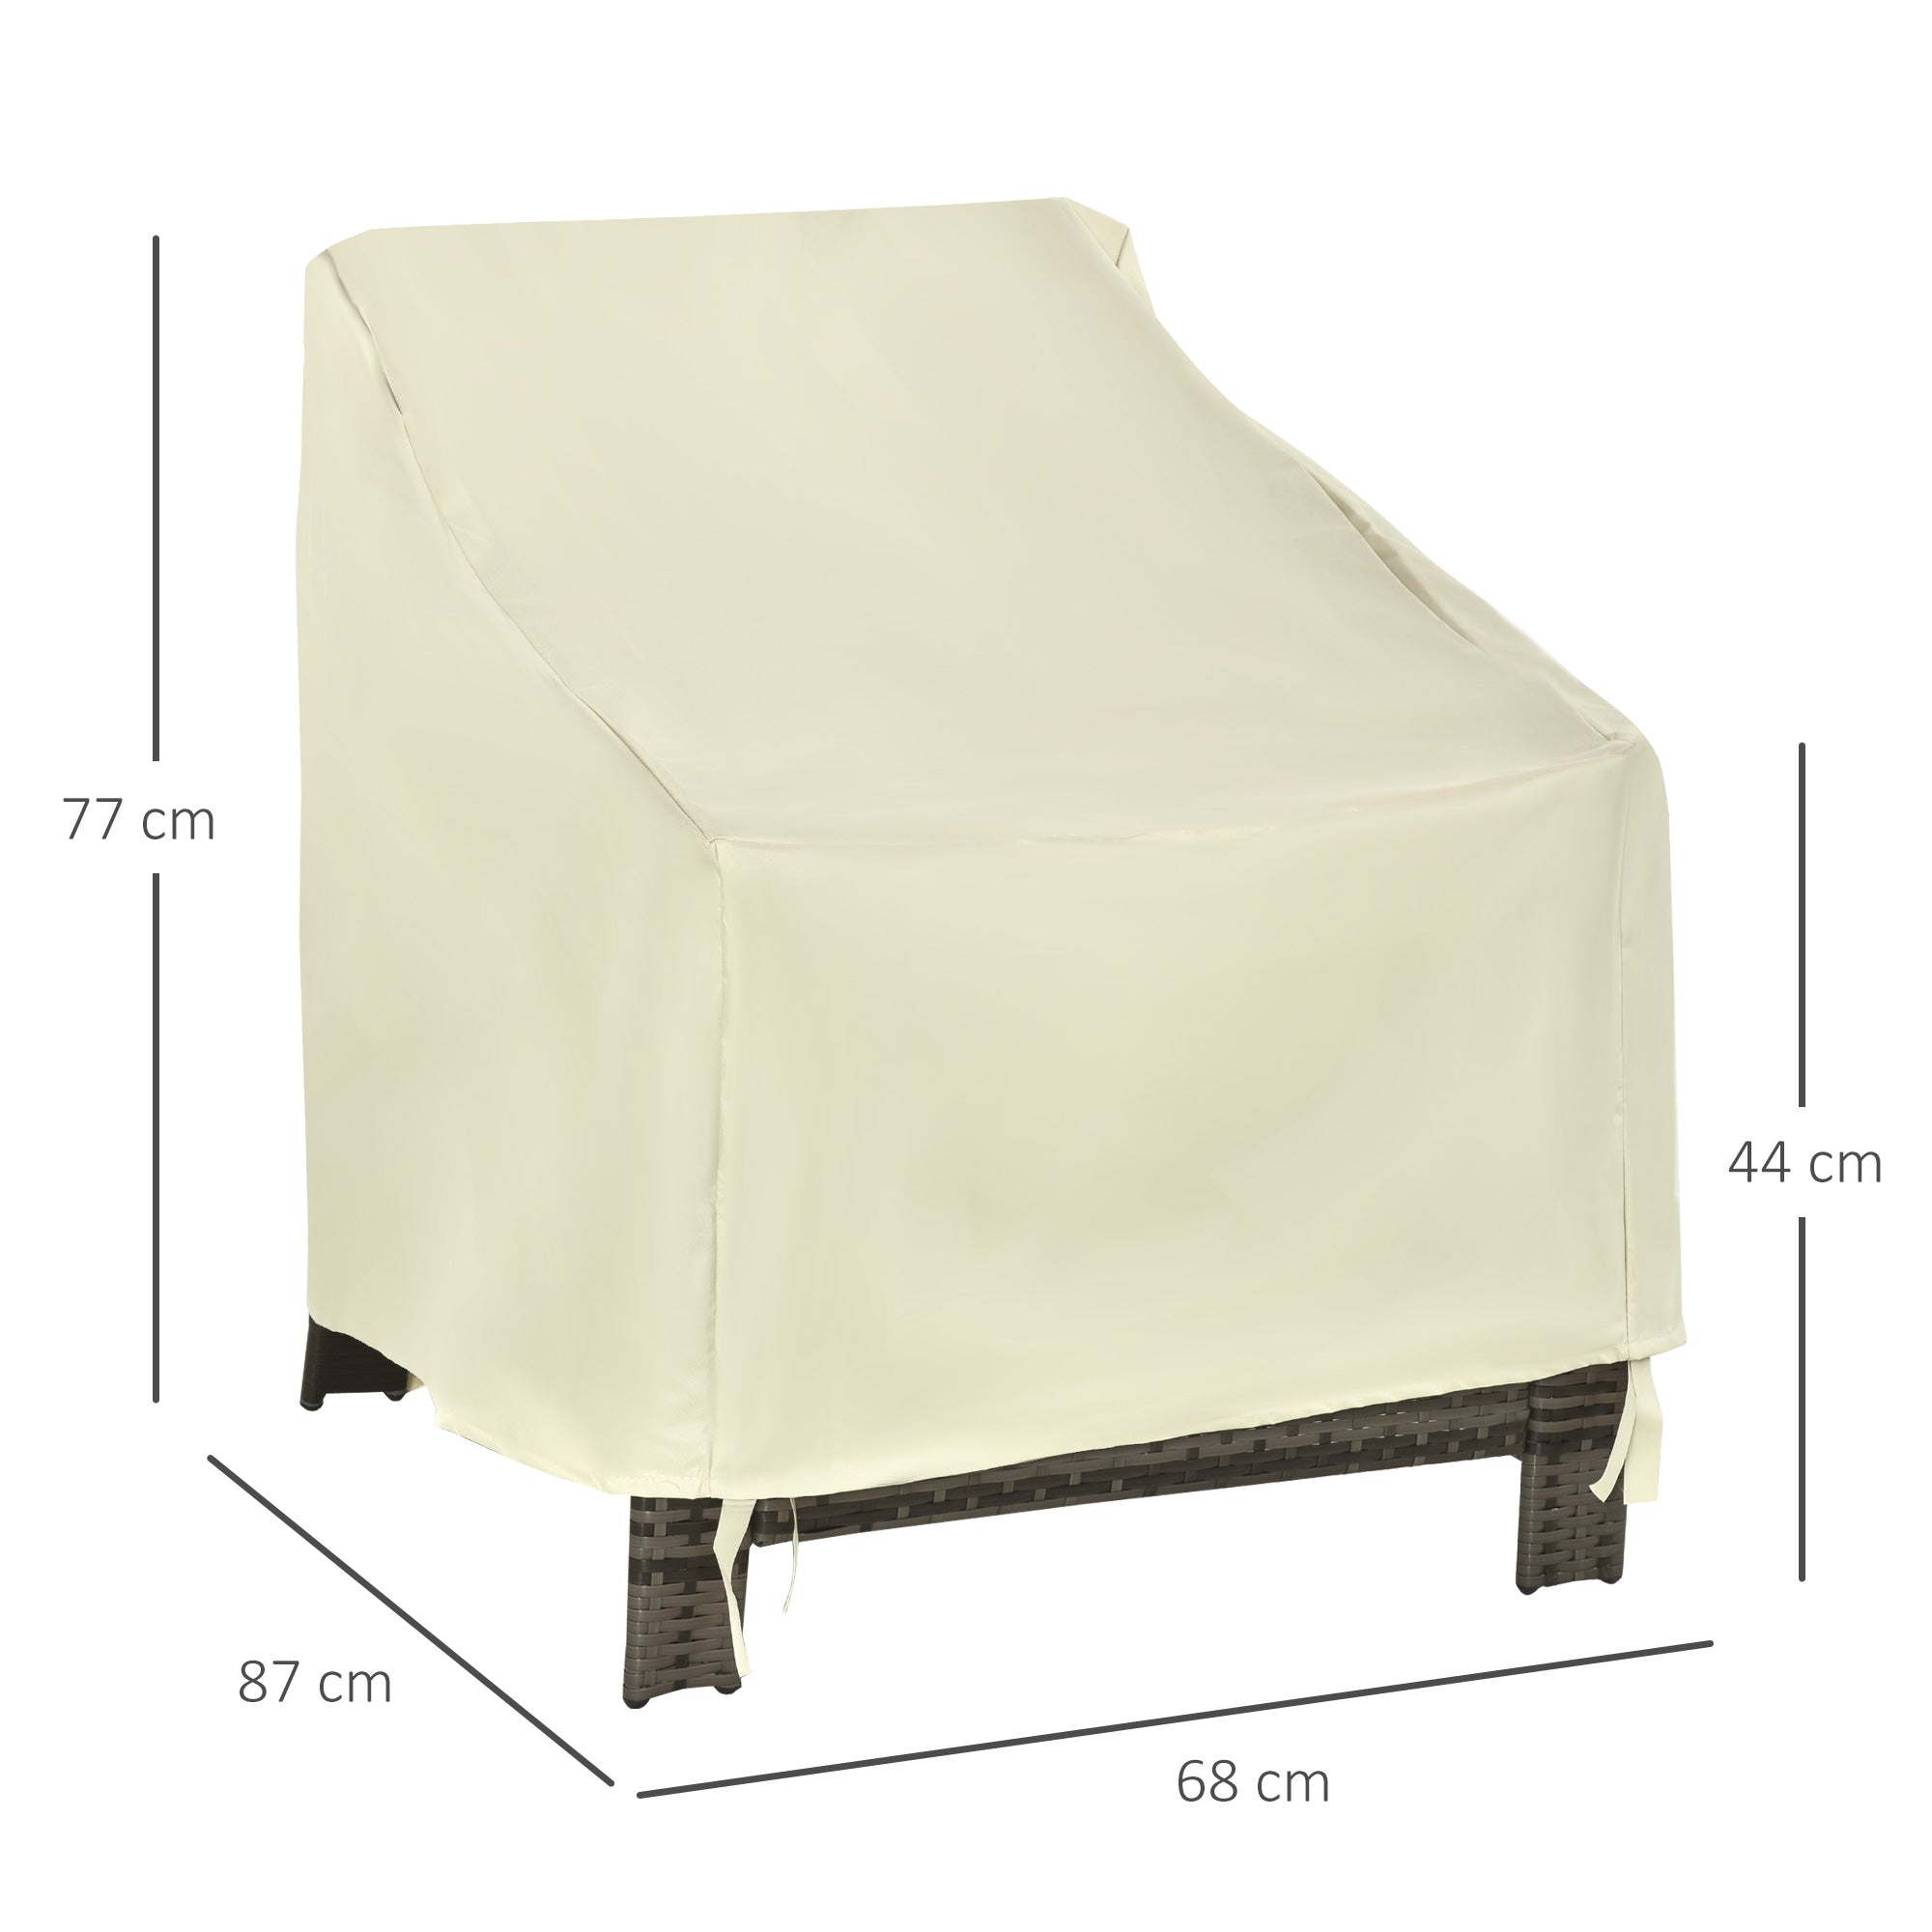 Outsunny 600D Oxford Cloth Furniture Cover Single Chair Garden Patio Outdoor Protector Waterproof 68x87x44-77cm - Inspirely